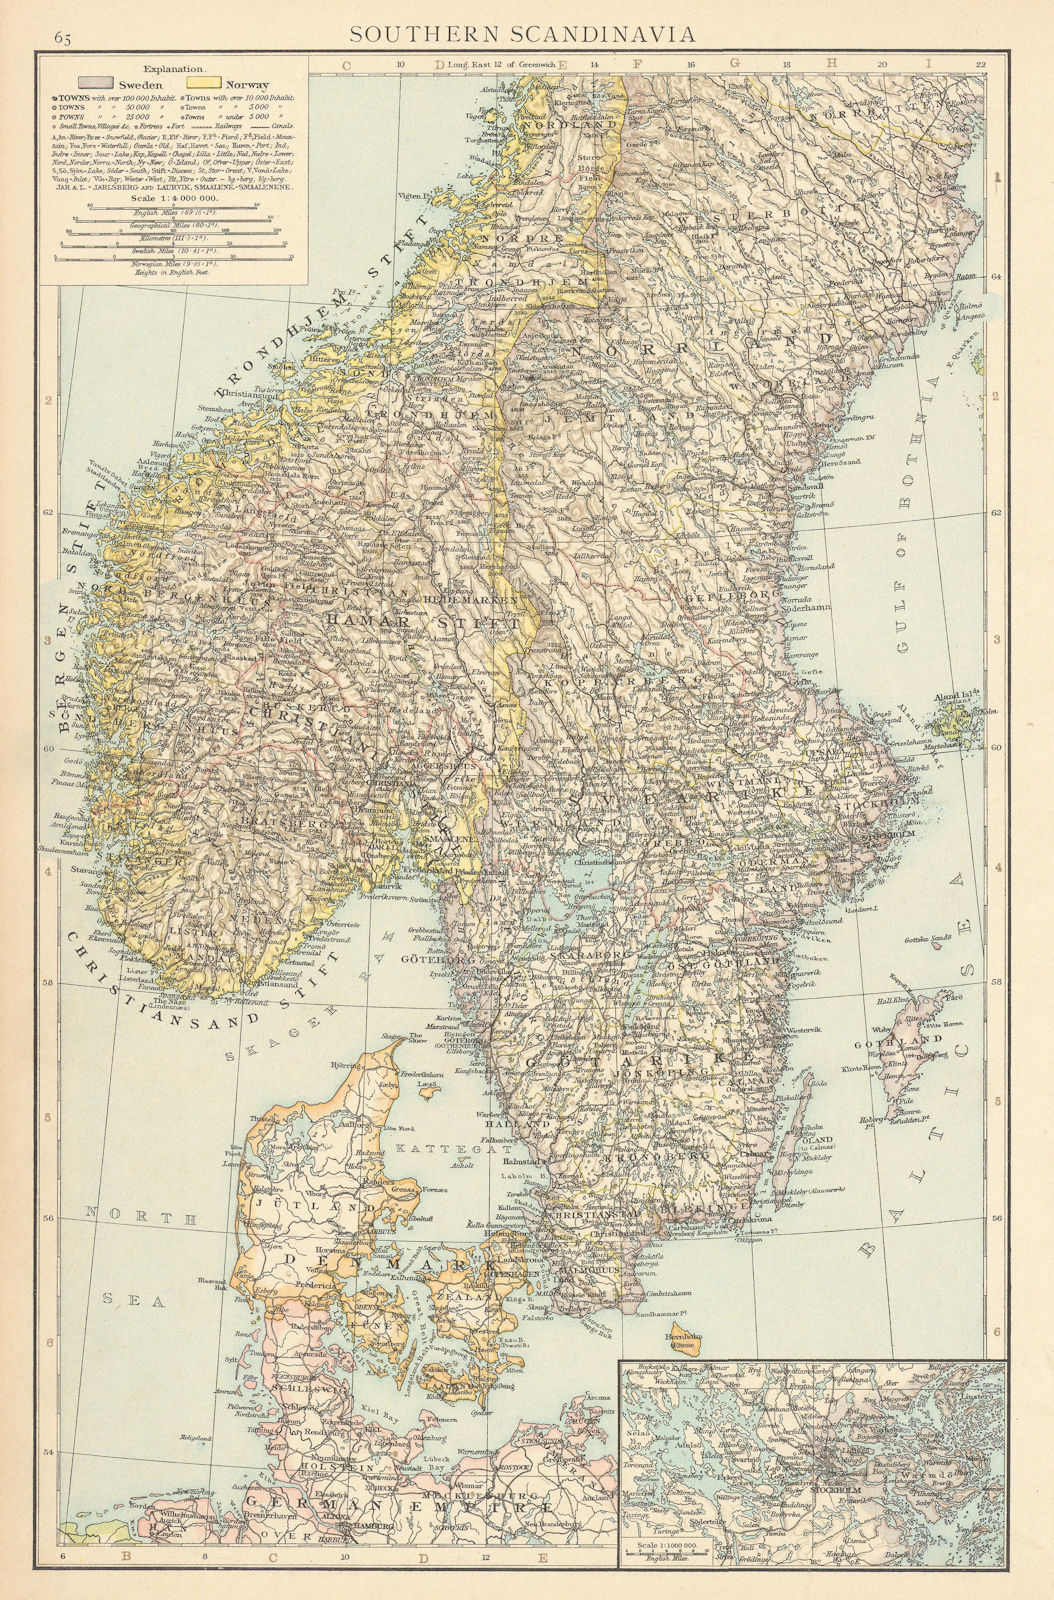 Associate Product Southern Scandinavia. Norway Sweden Denmark. Stockholm environs. TIMES 1895 map